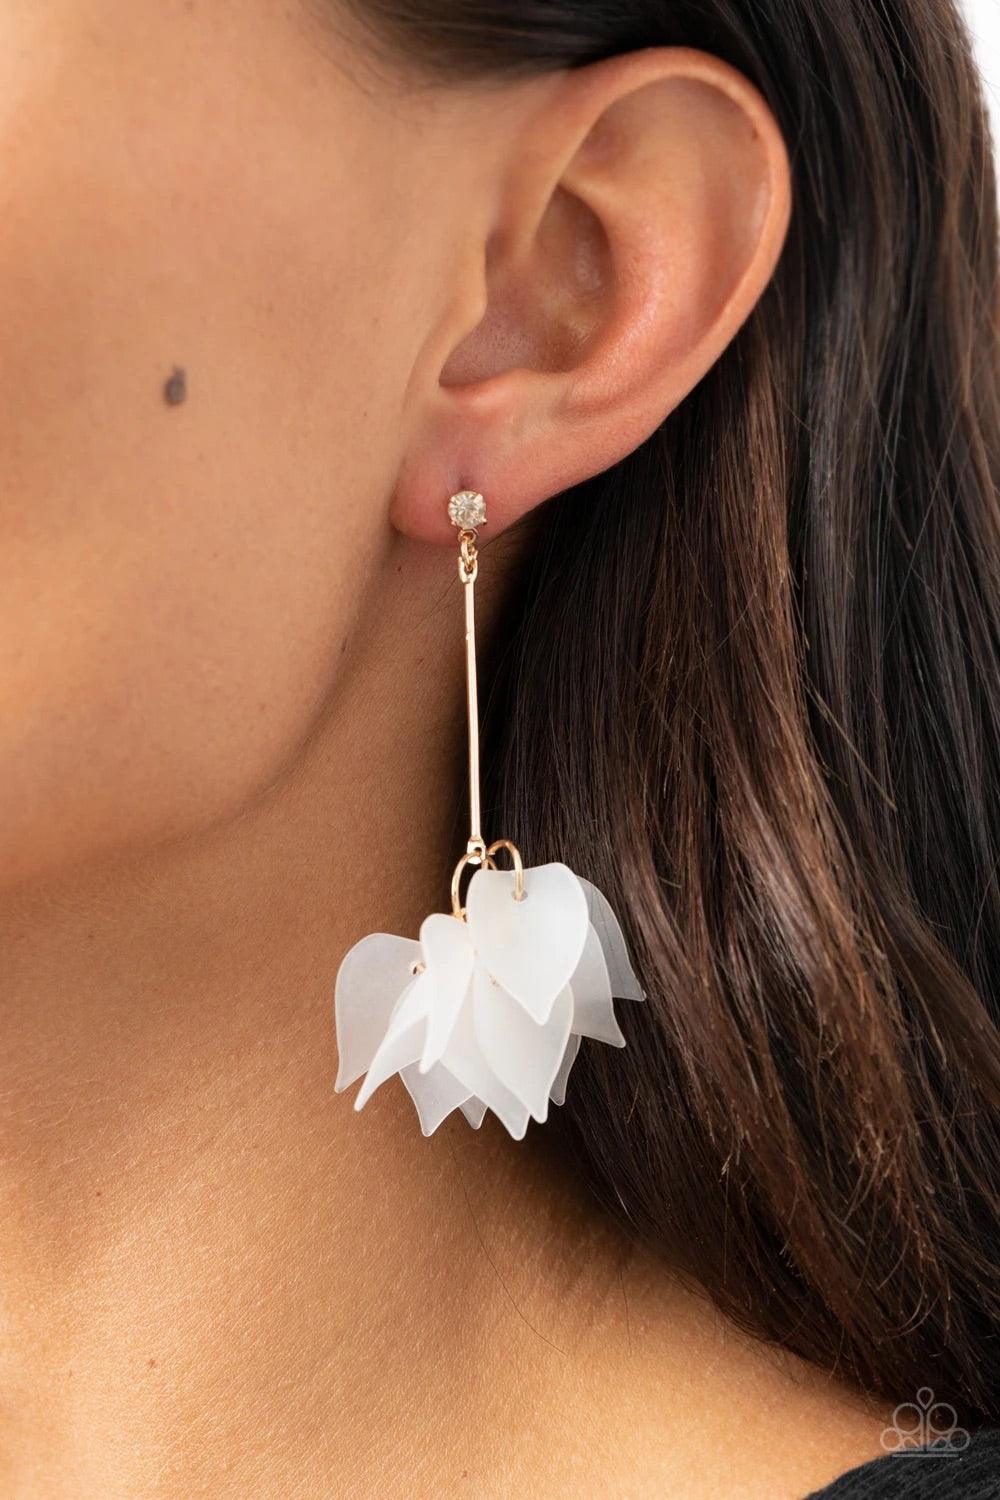 Paparazzi Accessories Suspended in Time - Gold A collection of curving white acrylic petals cluster at the bottom of a golden rod that is attached to a dainty white rhinestone for a refined finish. Earring attaches to a standard post fitting. Sold as one